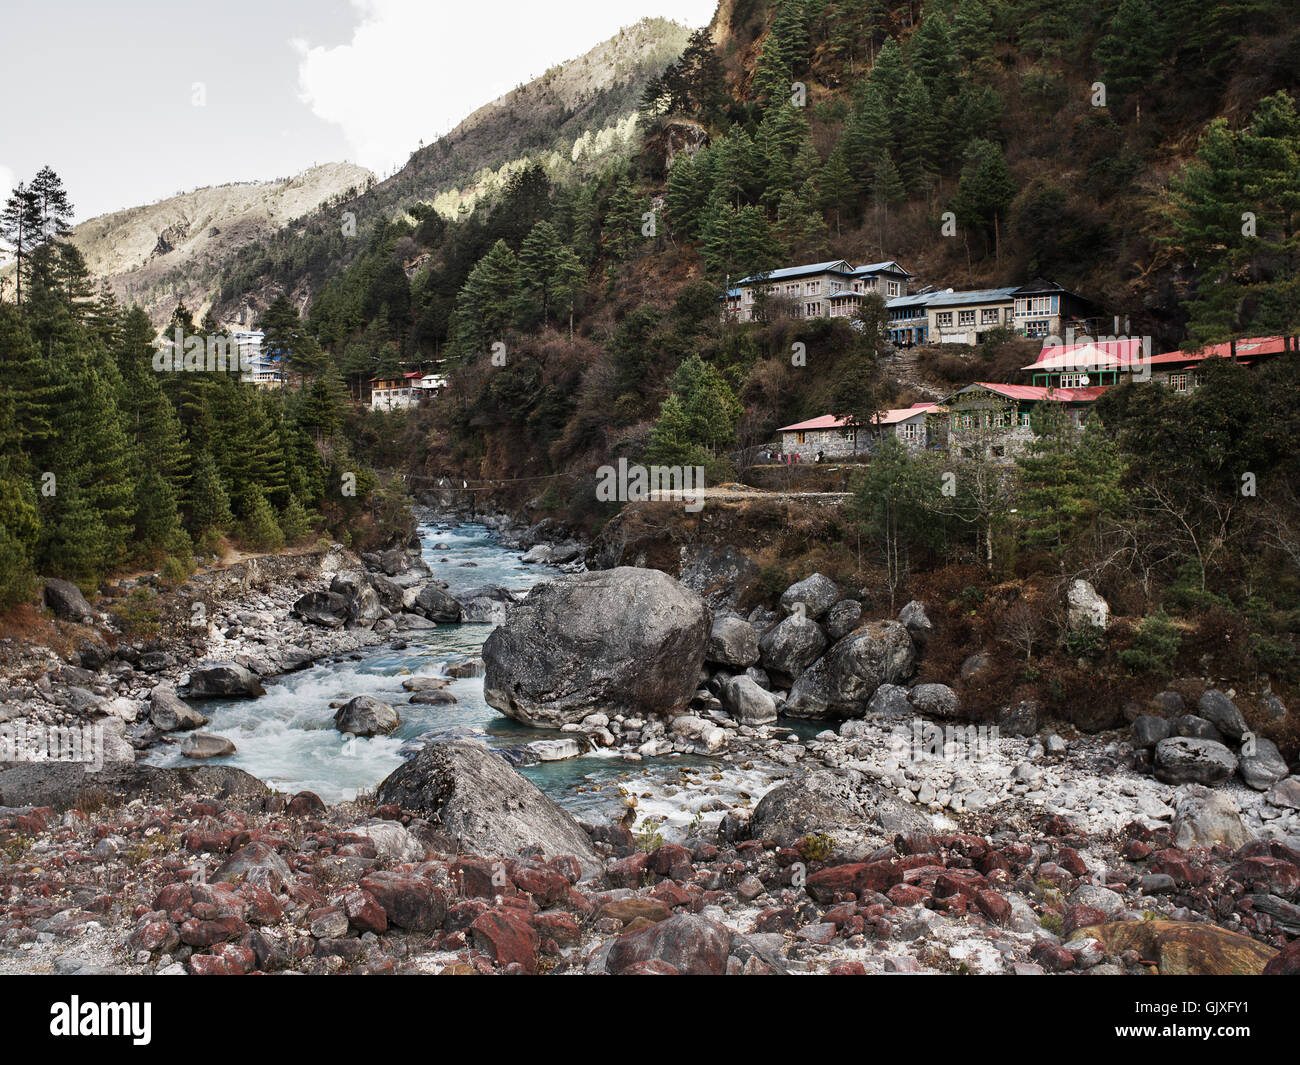 A view of the mountain village of Phakding, located in Nepal's Everest Base Camp. Stock Photo